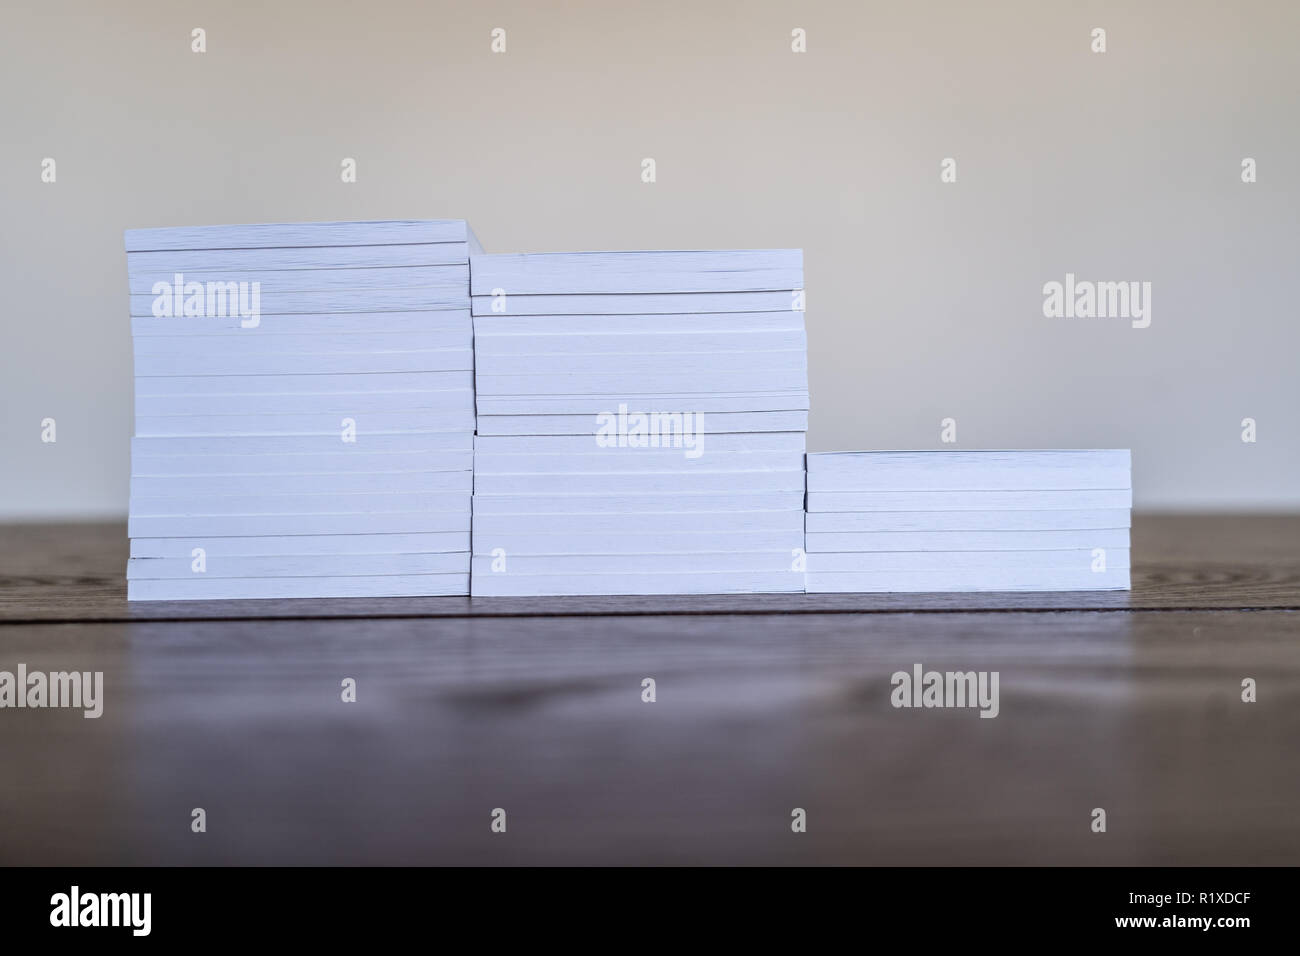 Stacks of Notepads on Office Table to be disributed Stock Photo